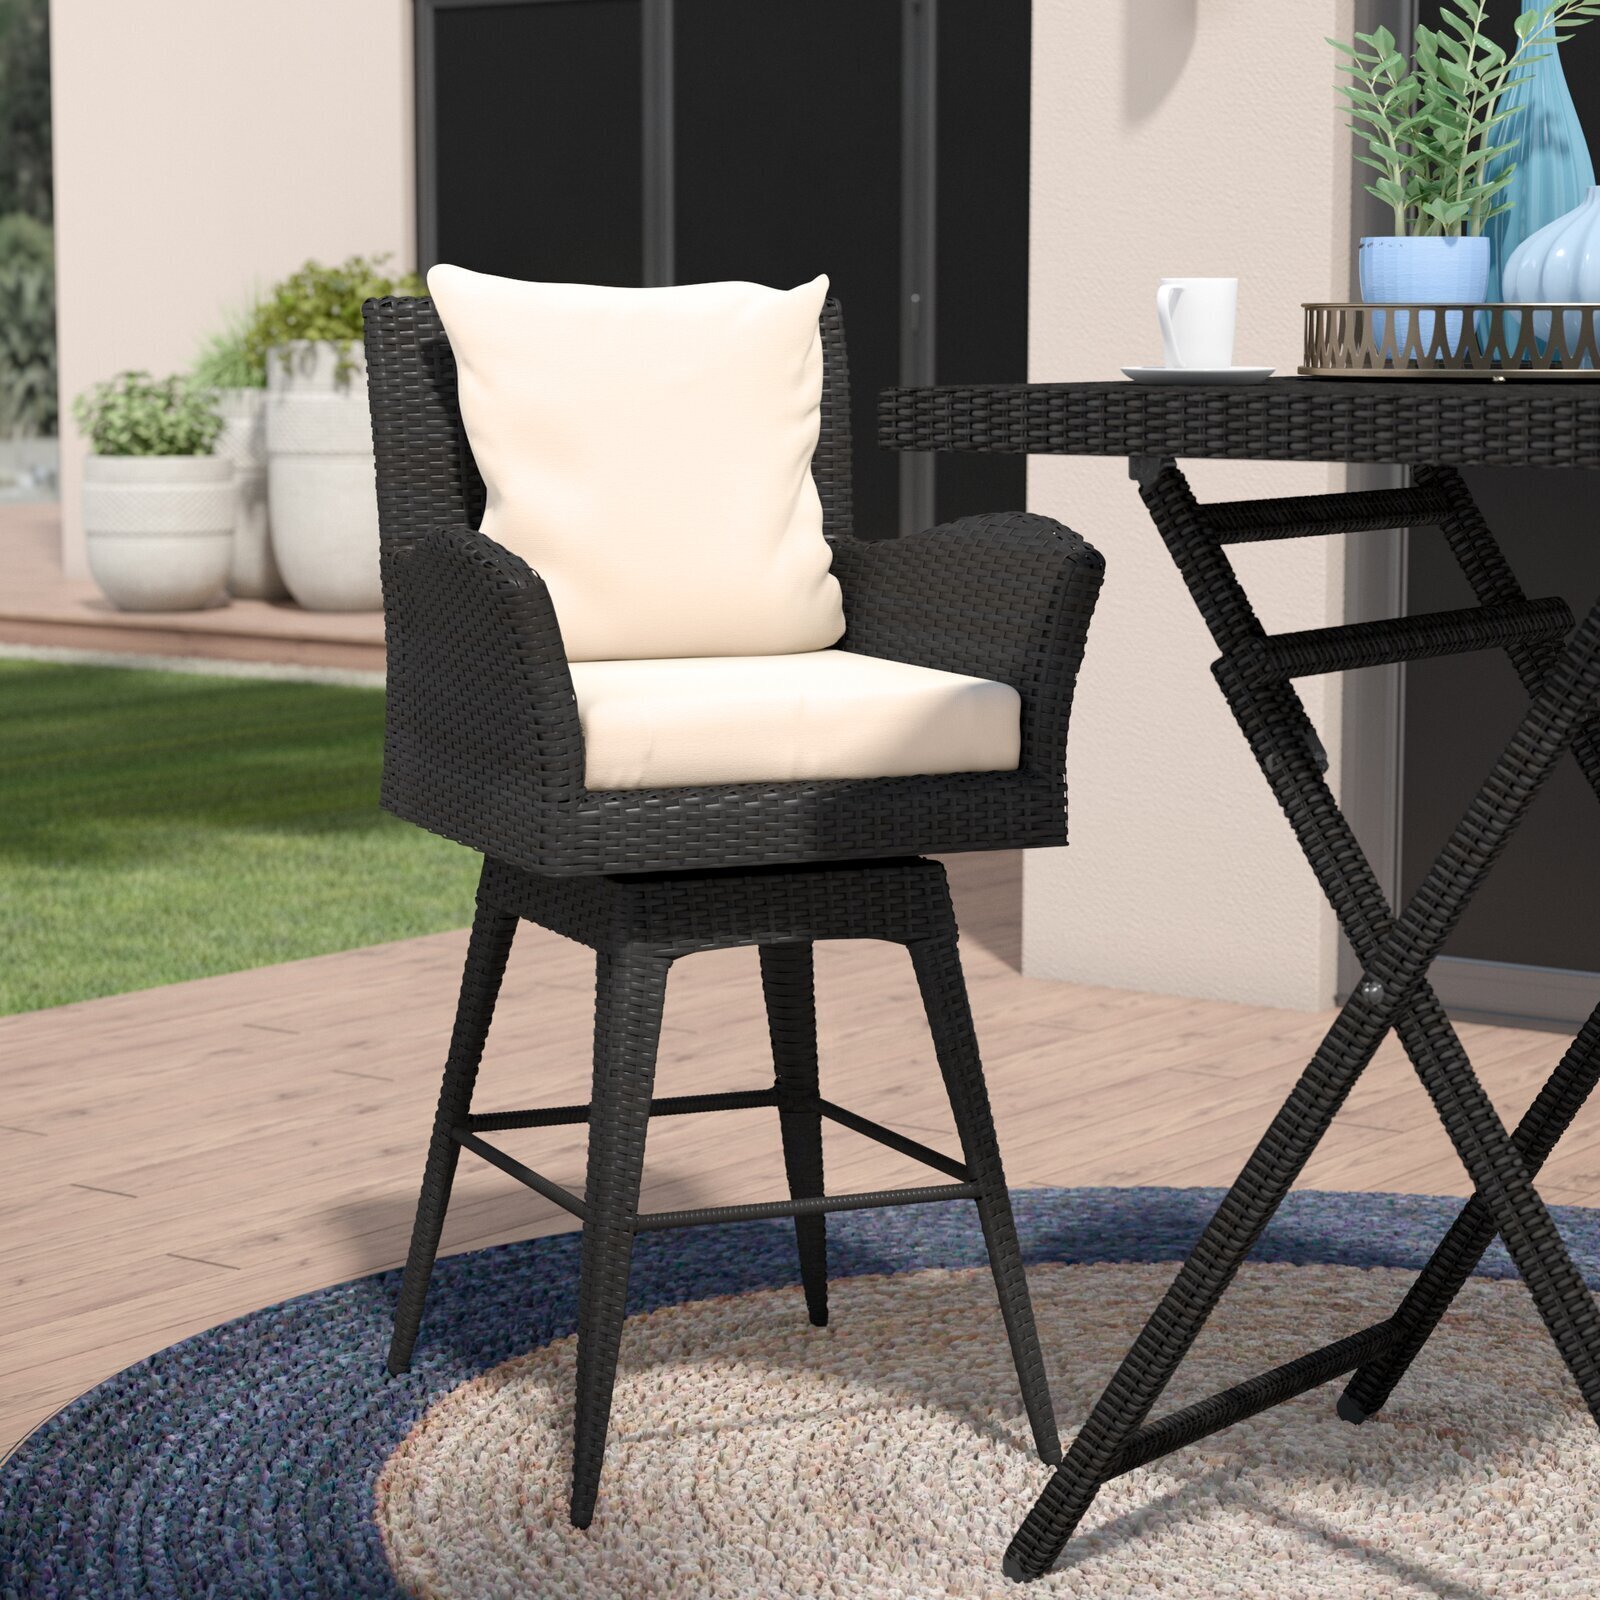 Wicker outdoor swivel bar stool with arms